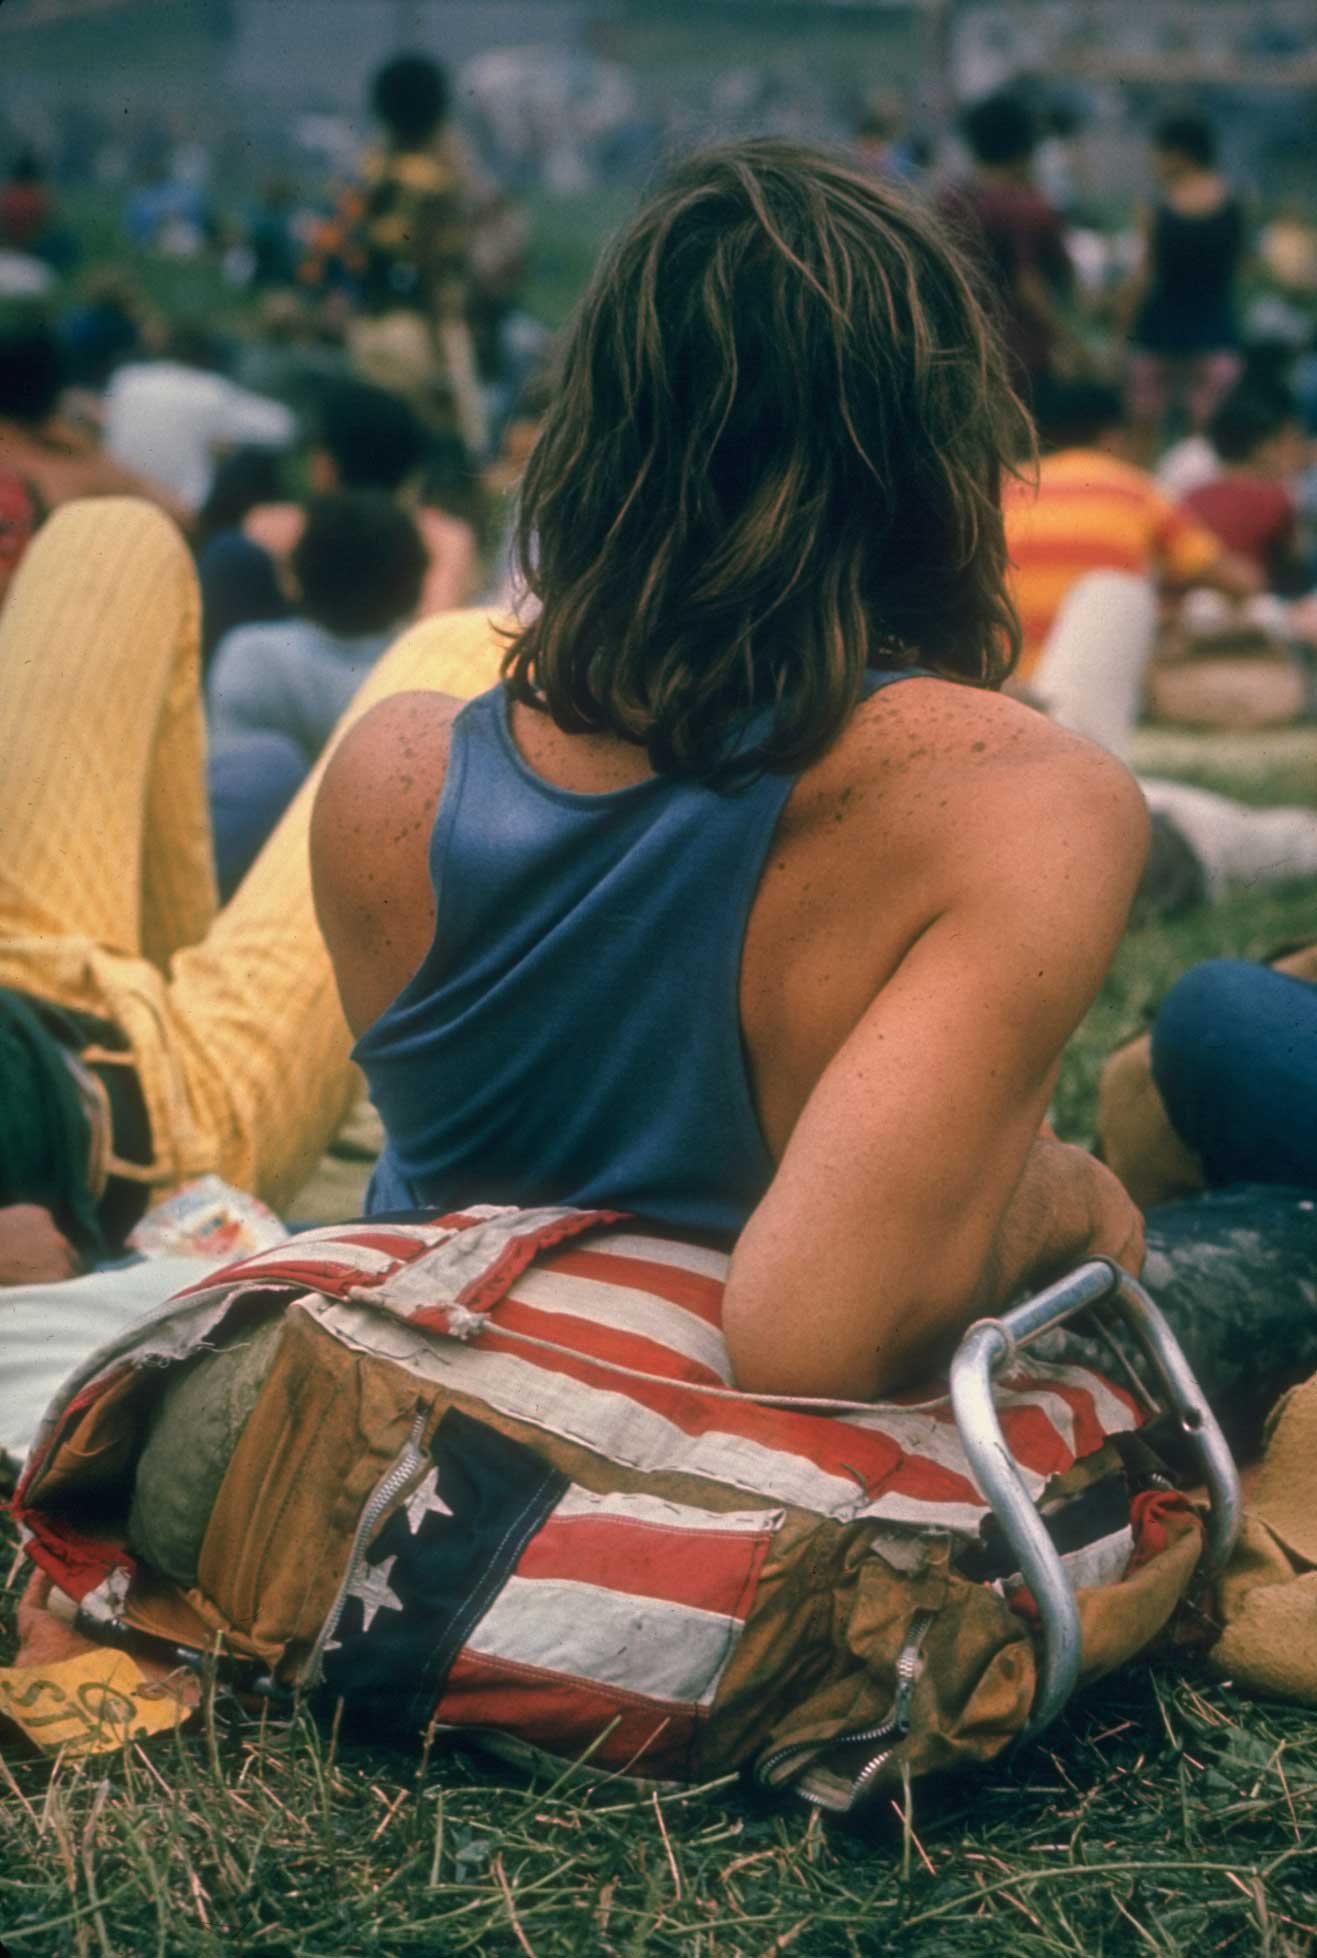 Woodstock Music &amp; Art Fair, August 1969. (Bill Eppridge&mdash;Time &amp; Life Pictures/Getty Images)